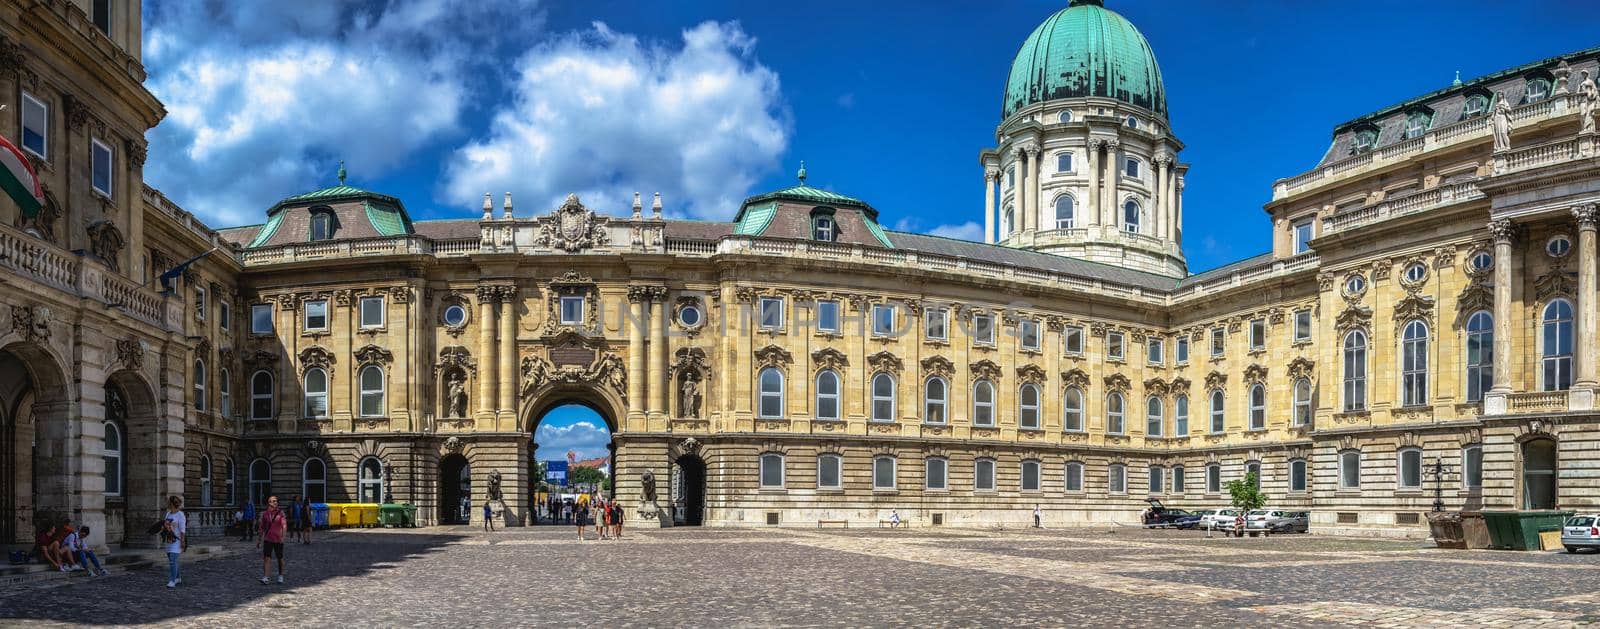 Lions yard of the Buda Castle Palace in Budapest, Hungary by Multipedia